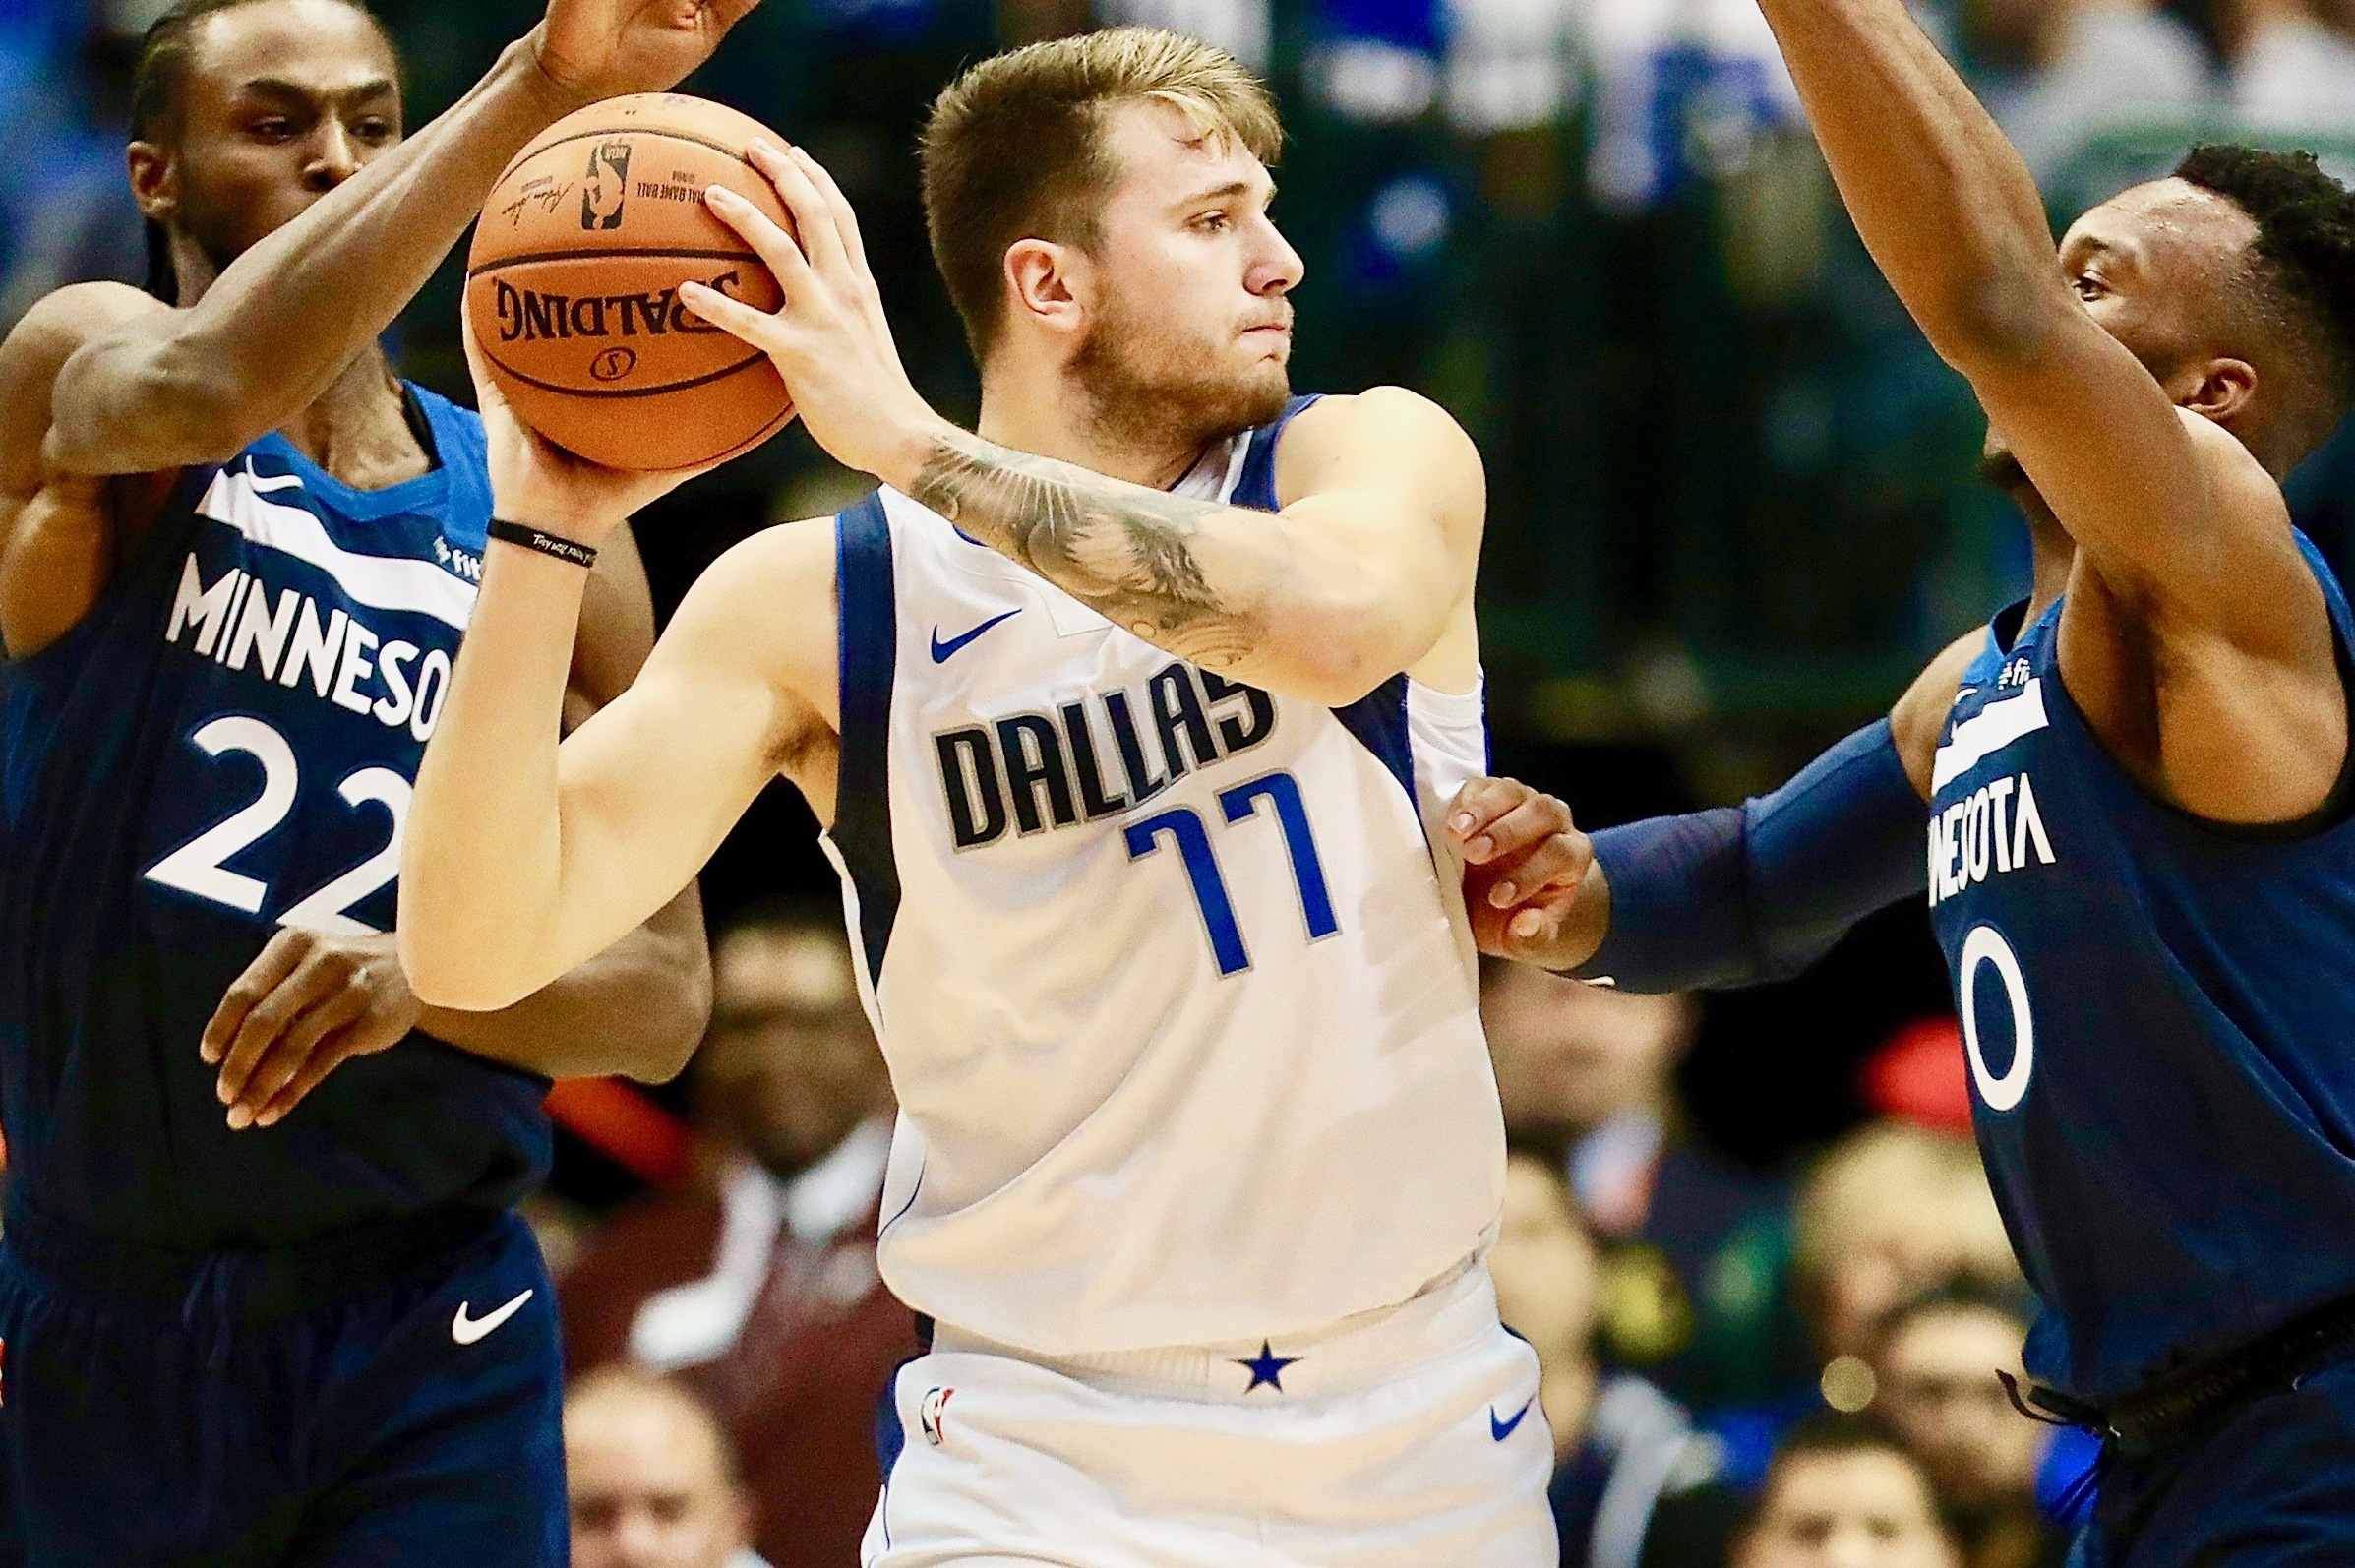 Phoenix Suns scouting: Luka Doncic is Europe's best - Valley of